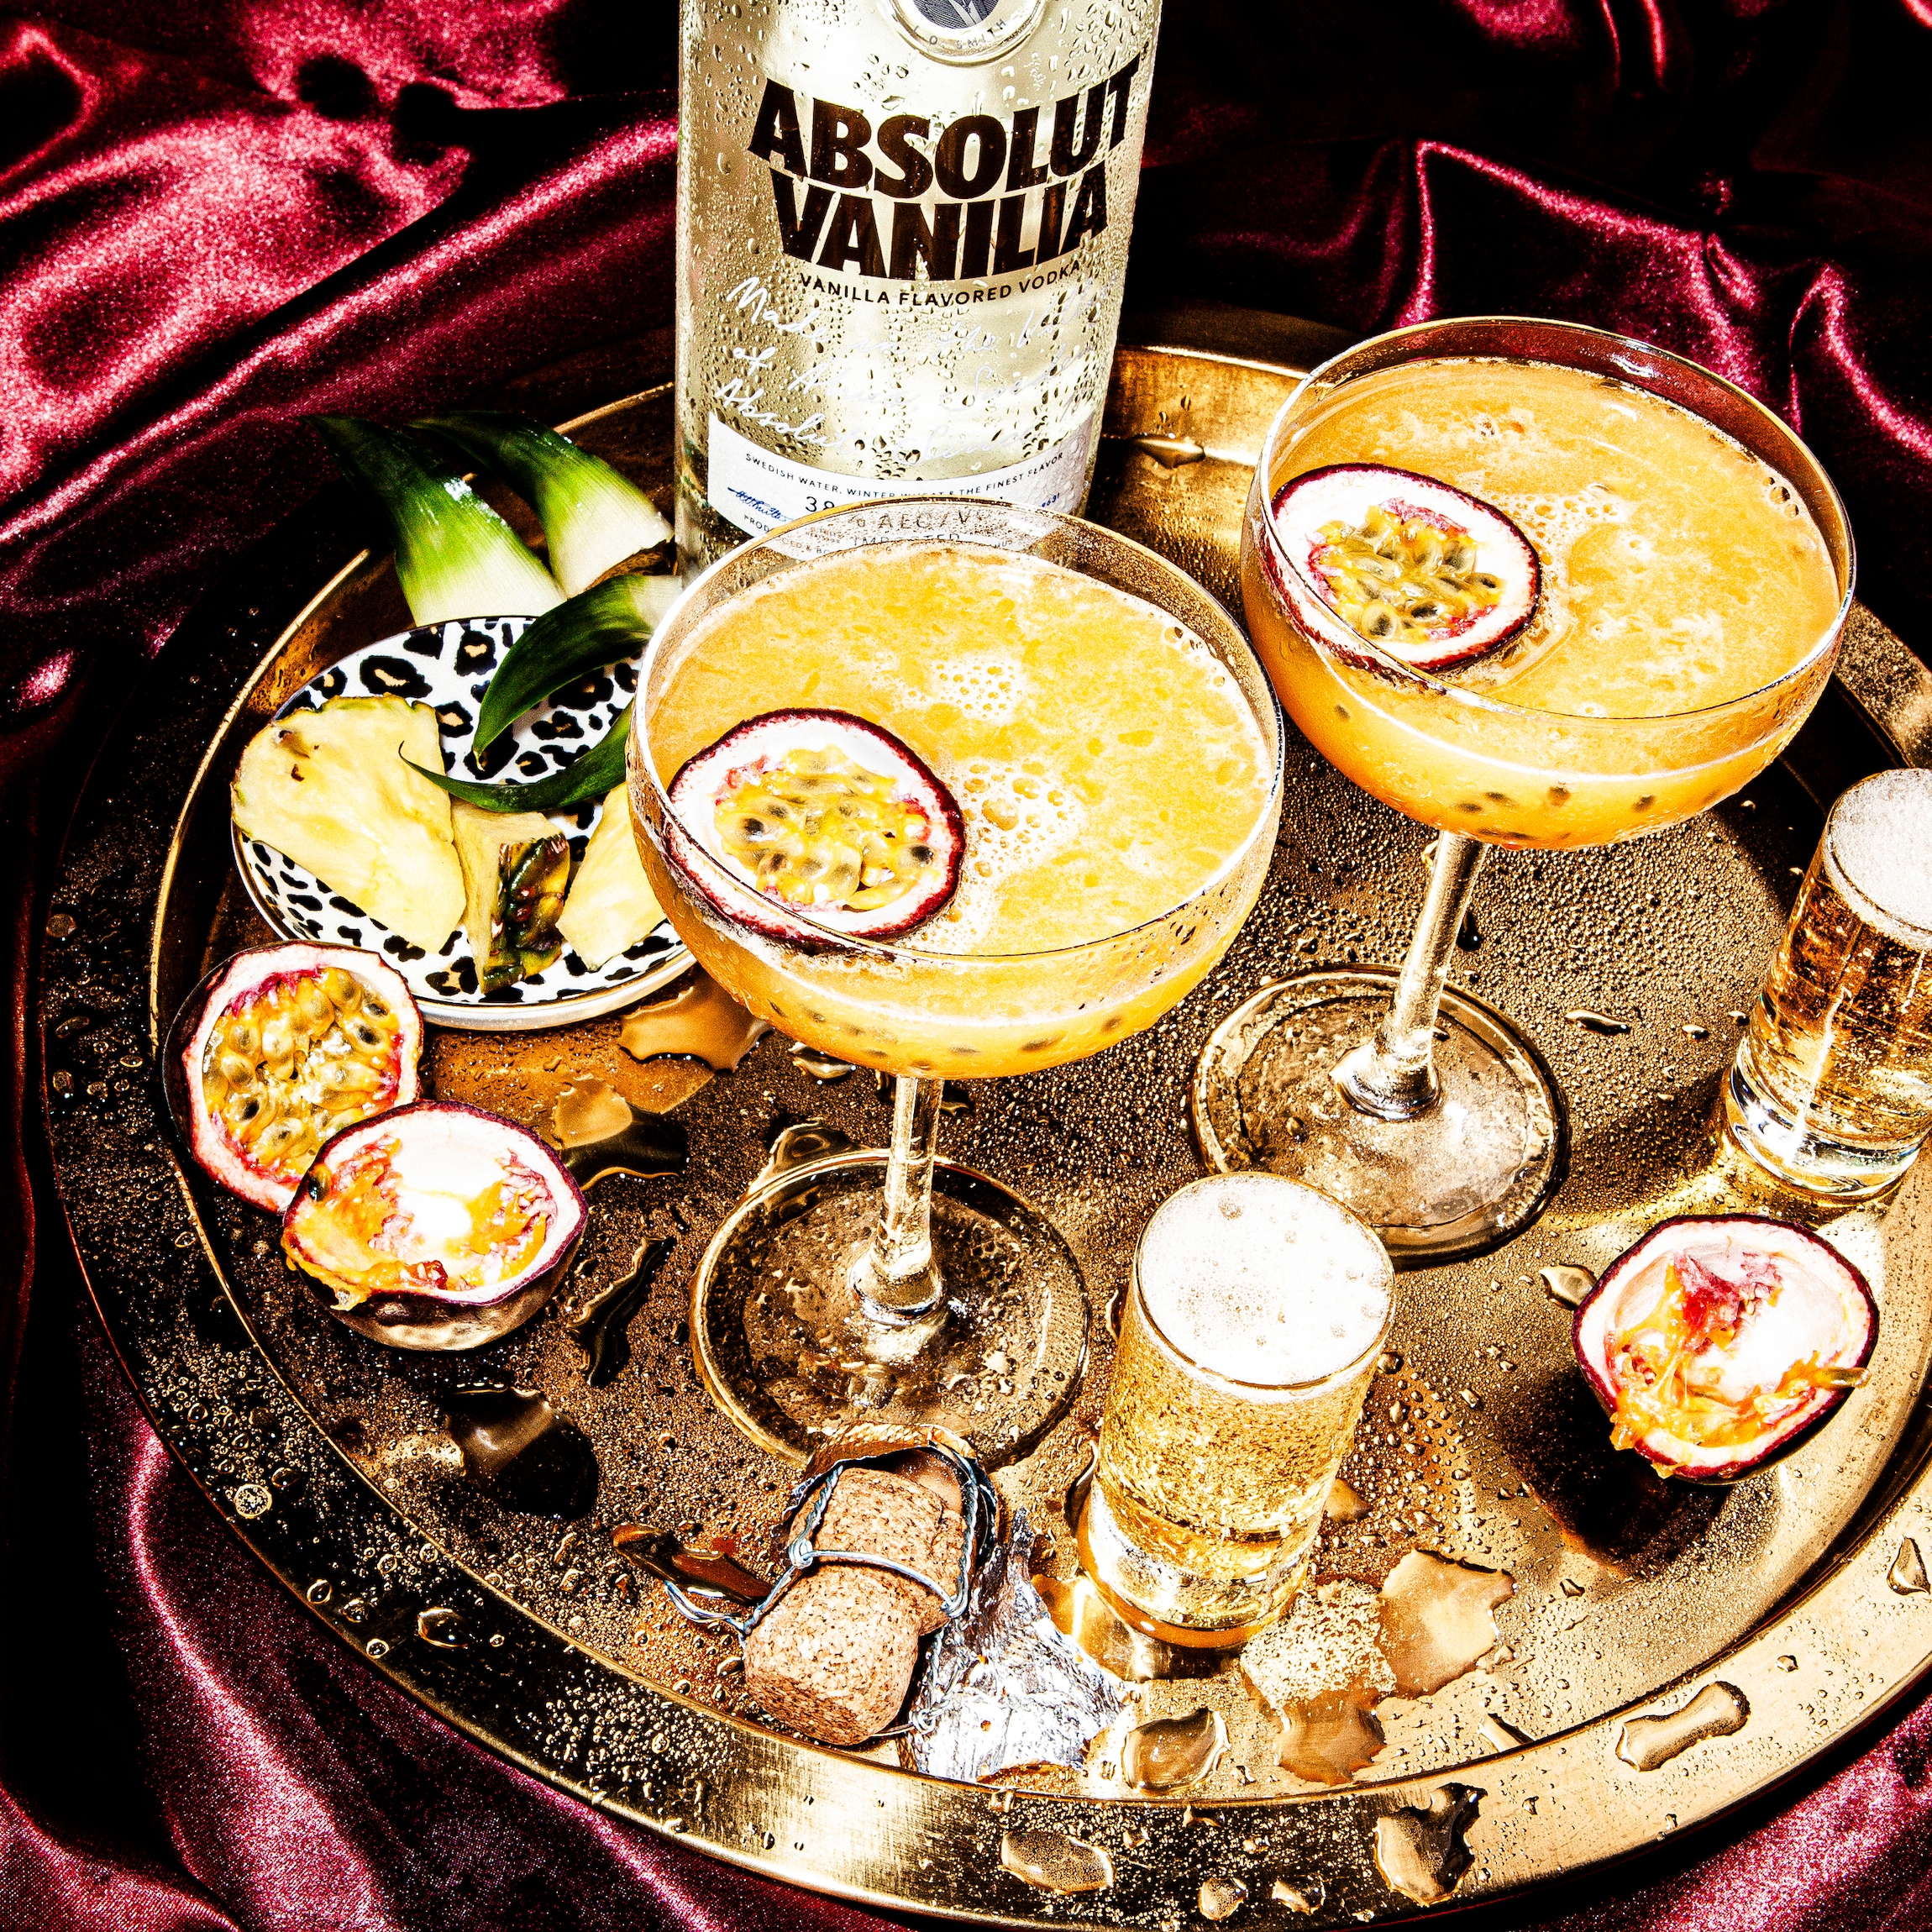 https://images.absolutdrinks.com/drink-images/Raw/Absolut/1f9148f8-97ee-4ef2-ac54-cf68e390ae74.jpg